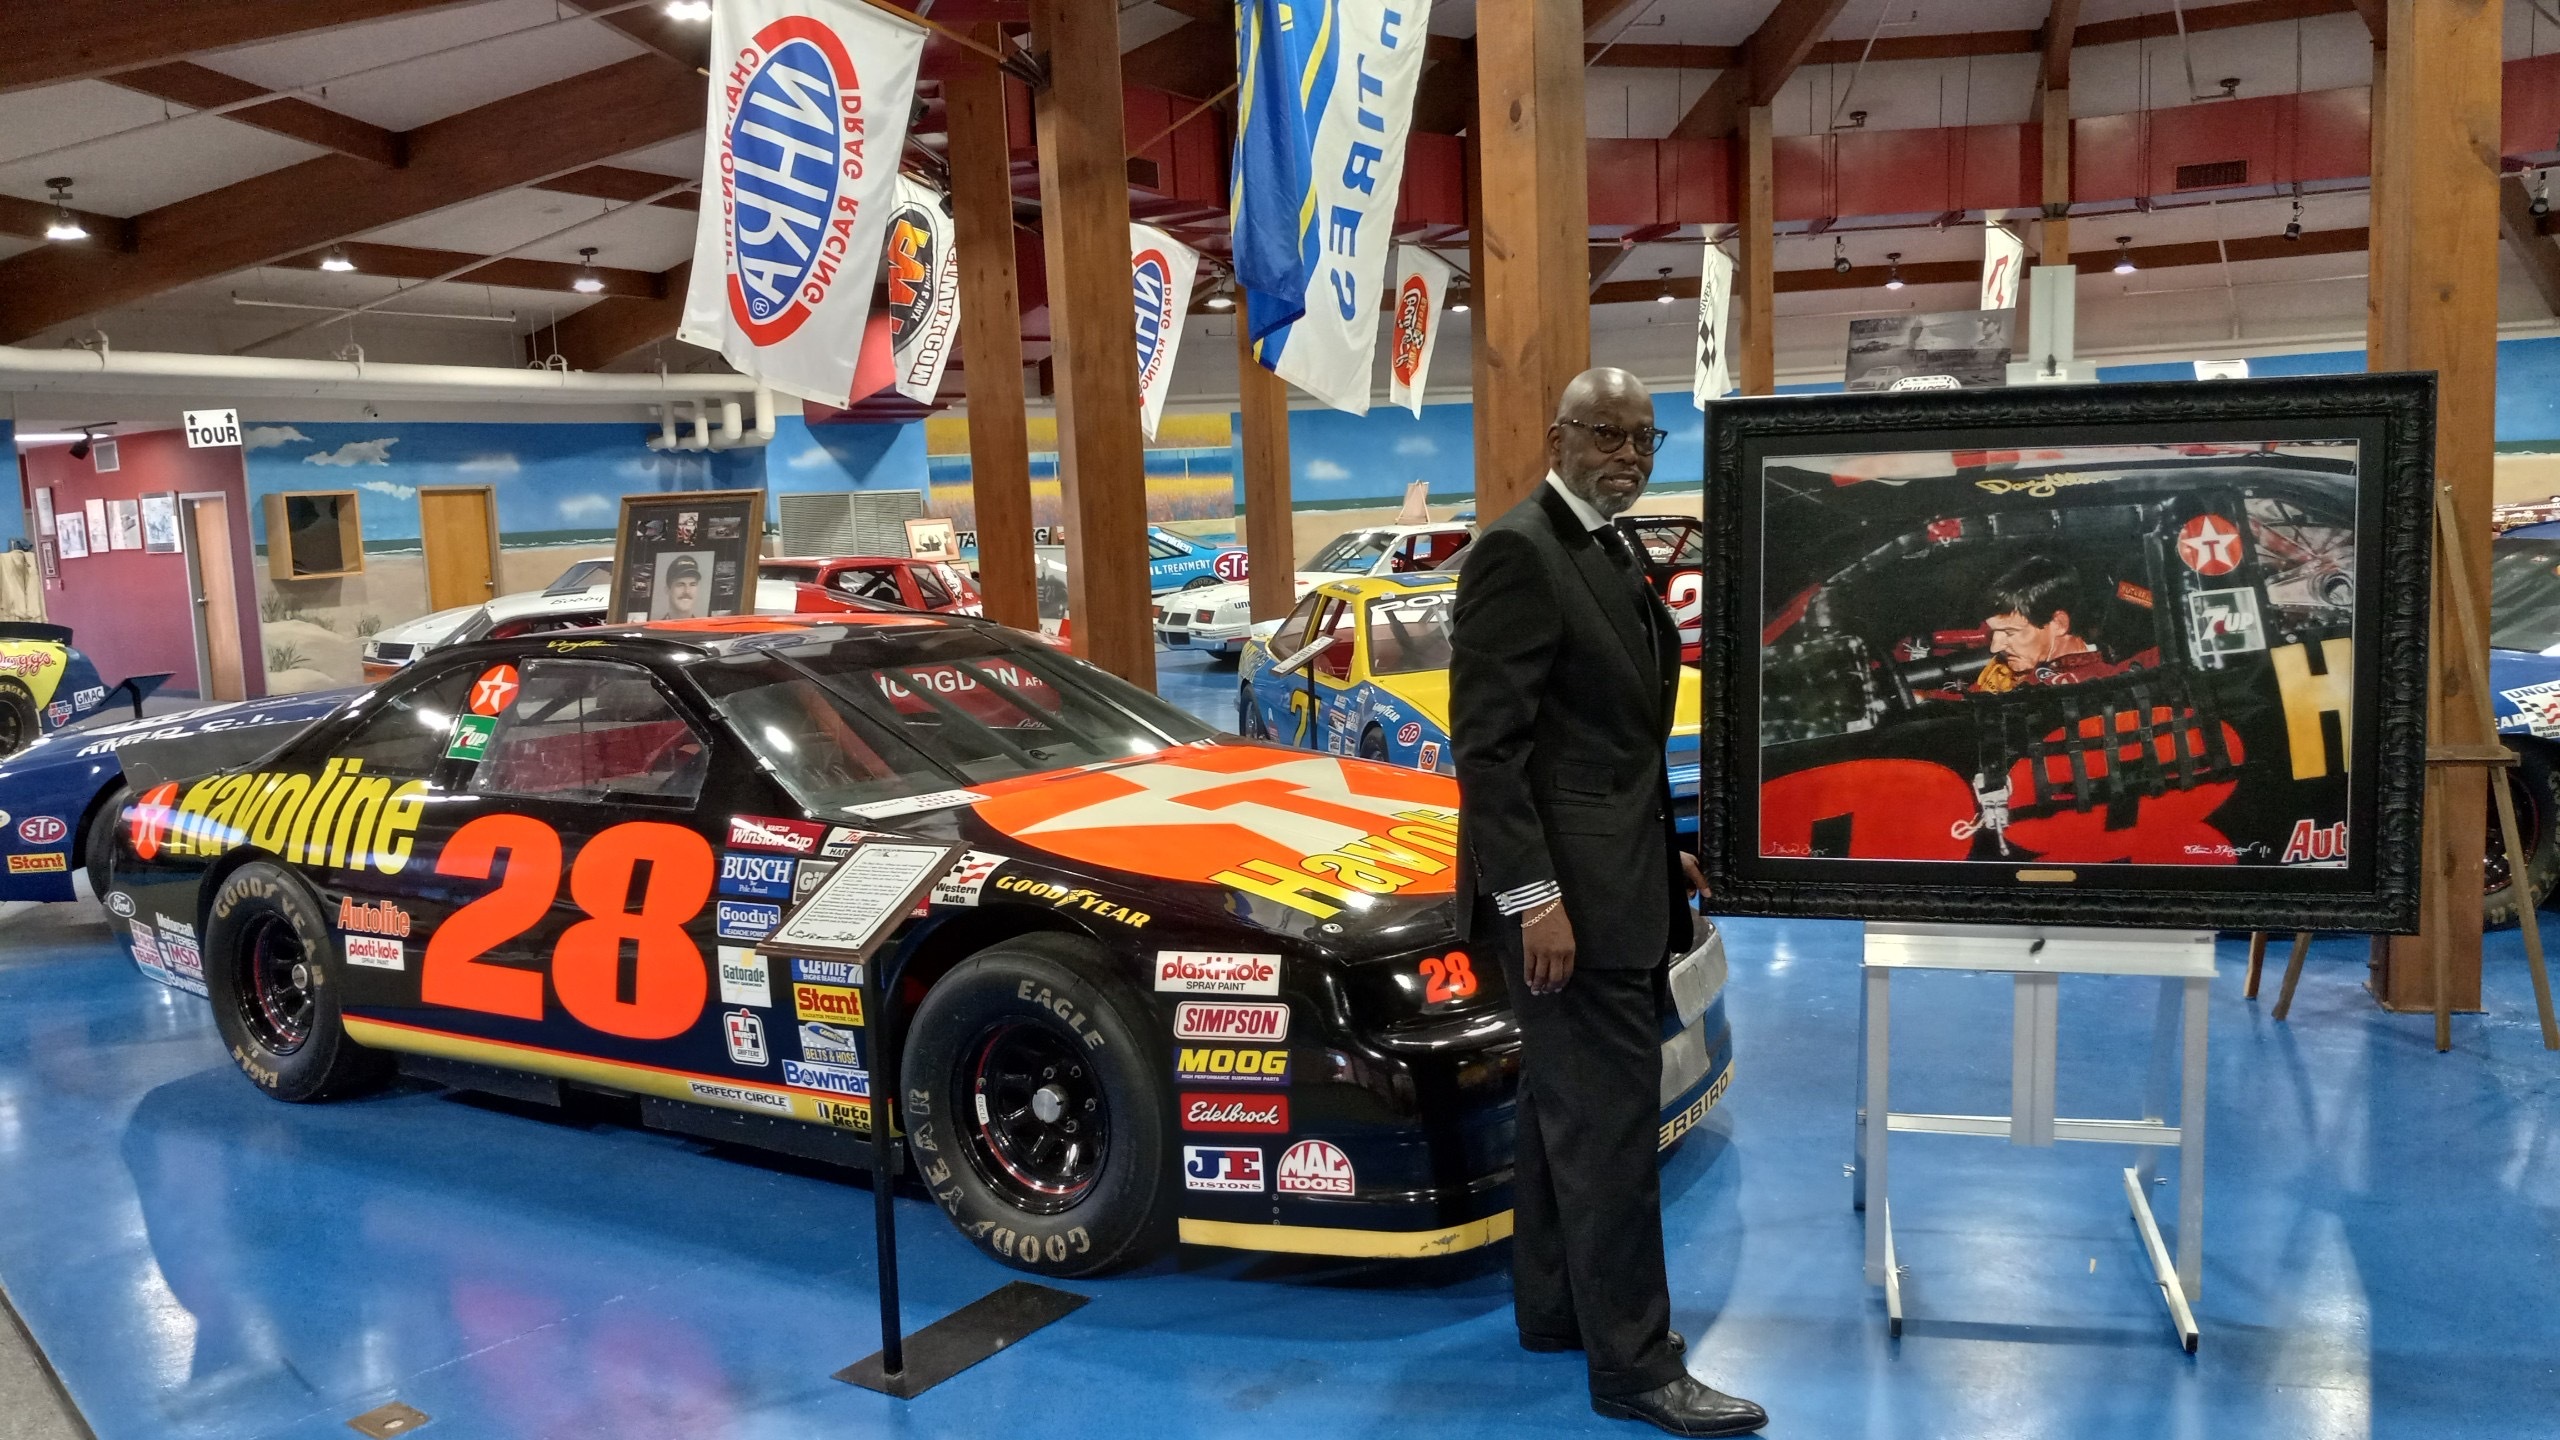 Steve Skipper standing next to his painting of Davey Allison and Davey Allison's racecar.